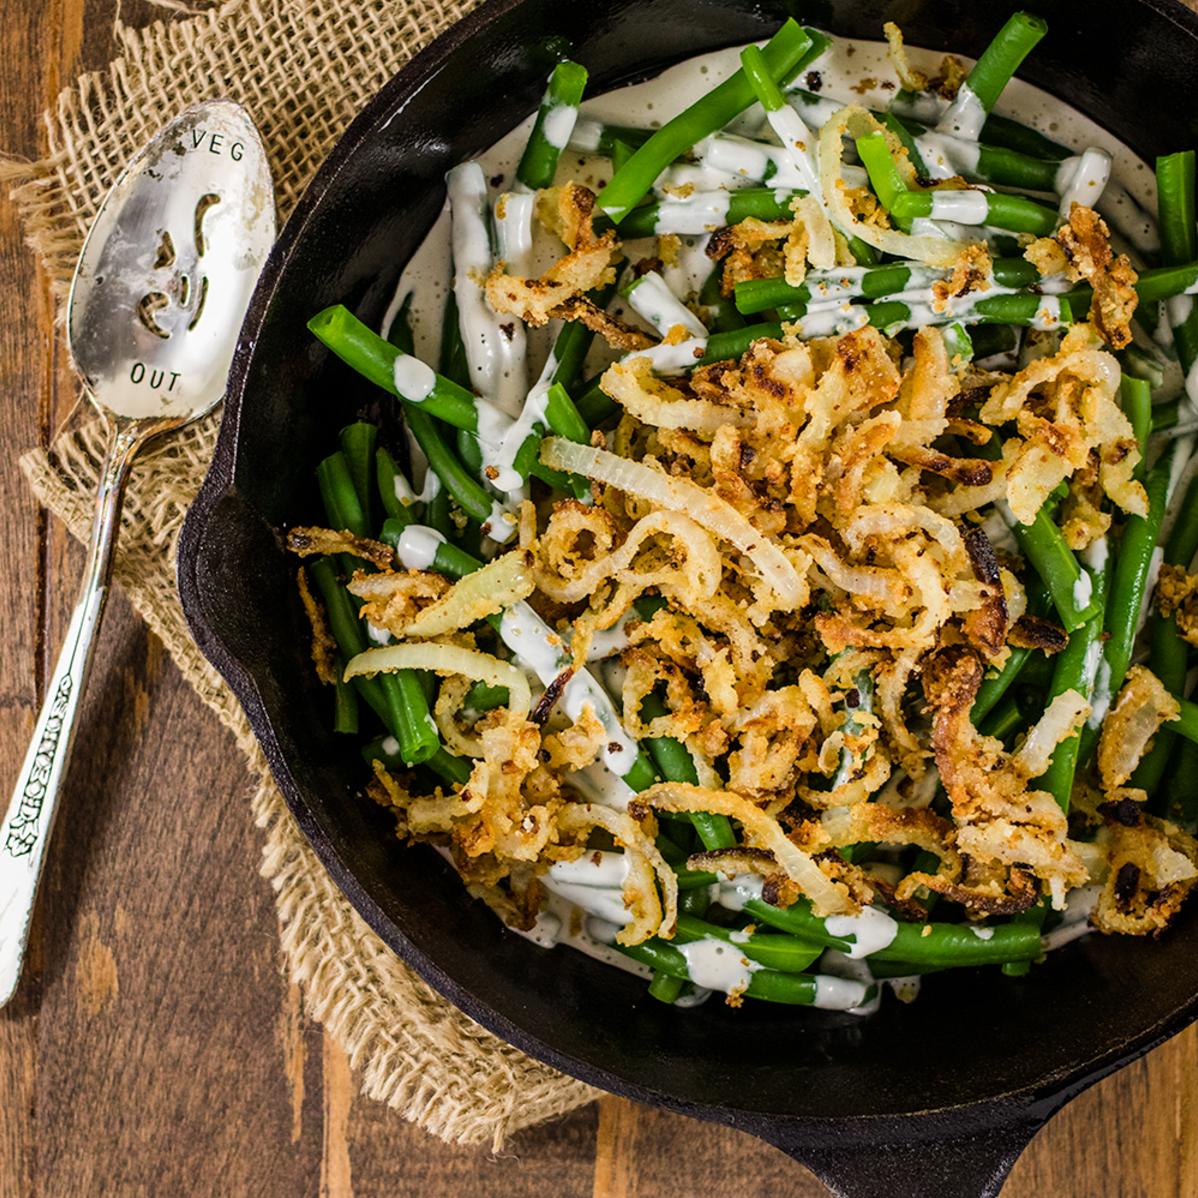  This topping takes your green bean casserole dish to the next level.